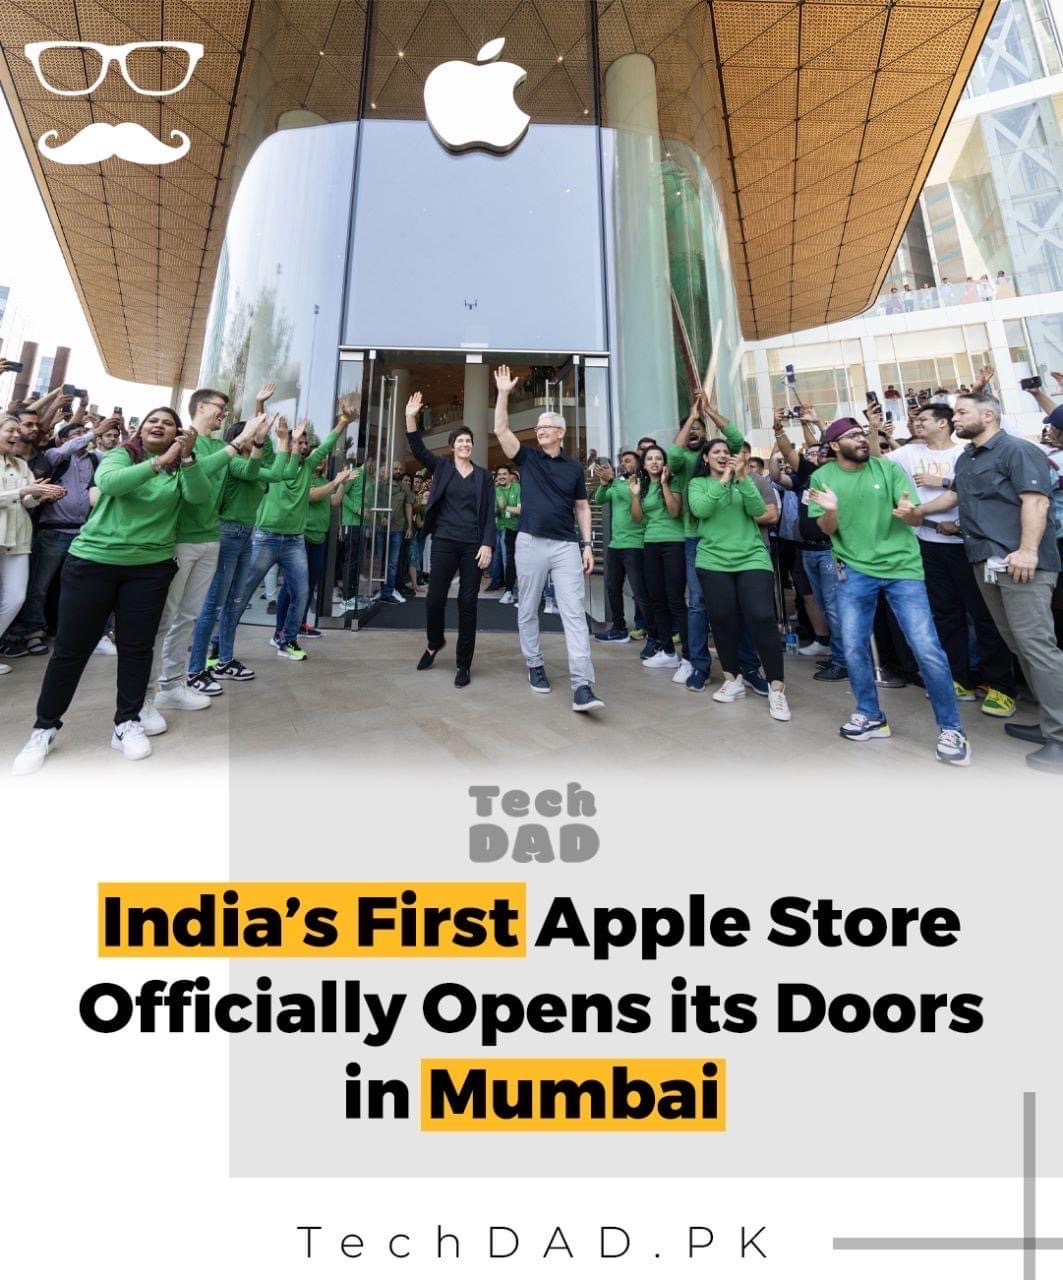 India's First Apple Store Officially Opens its Doors in Mumbai TeChDAD. PK